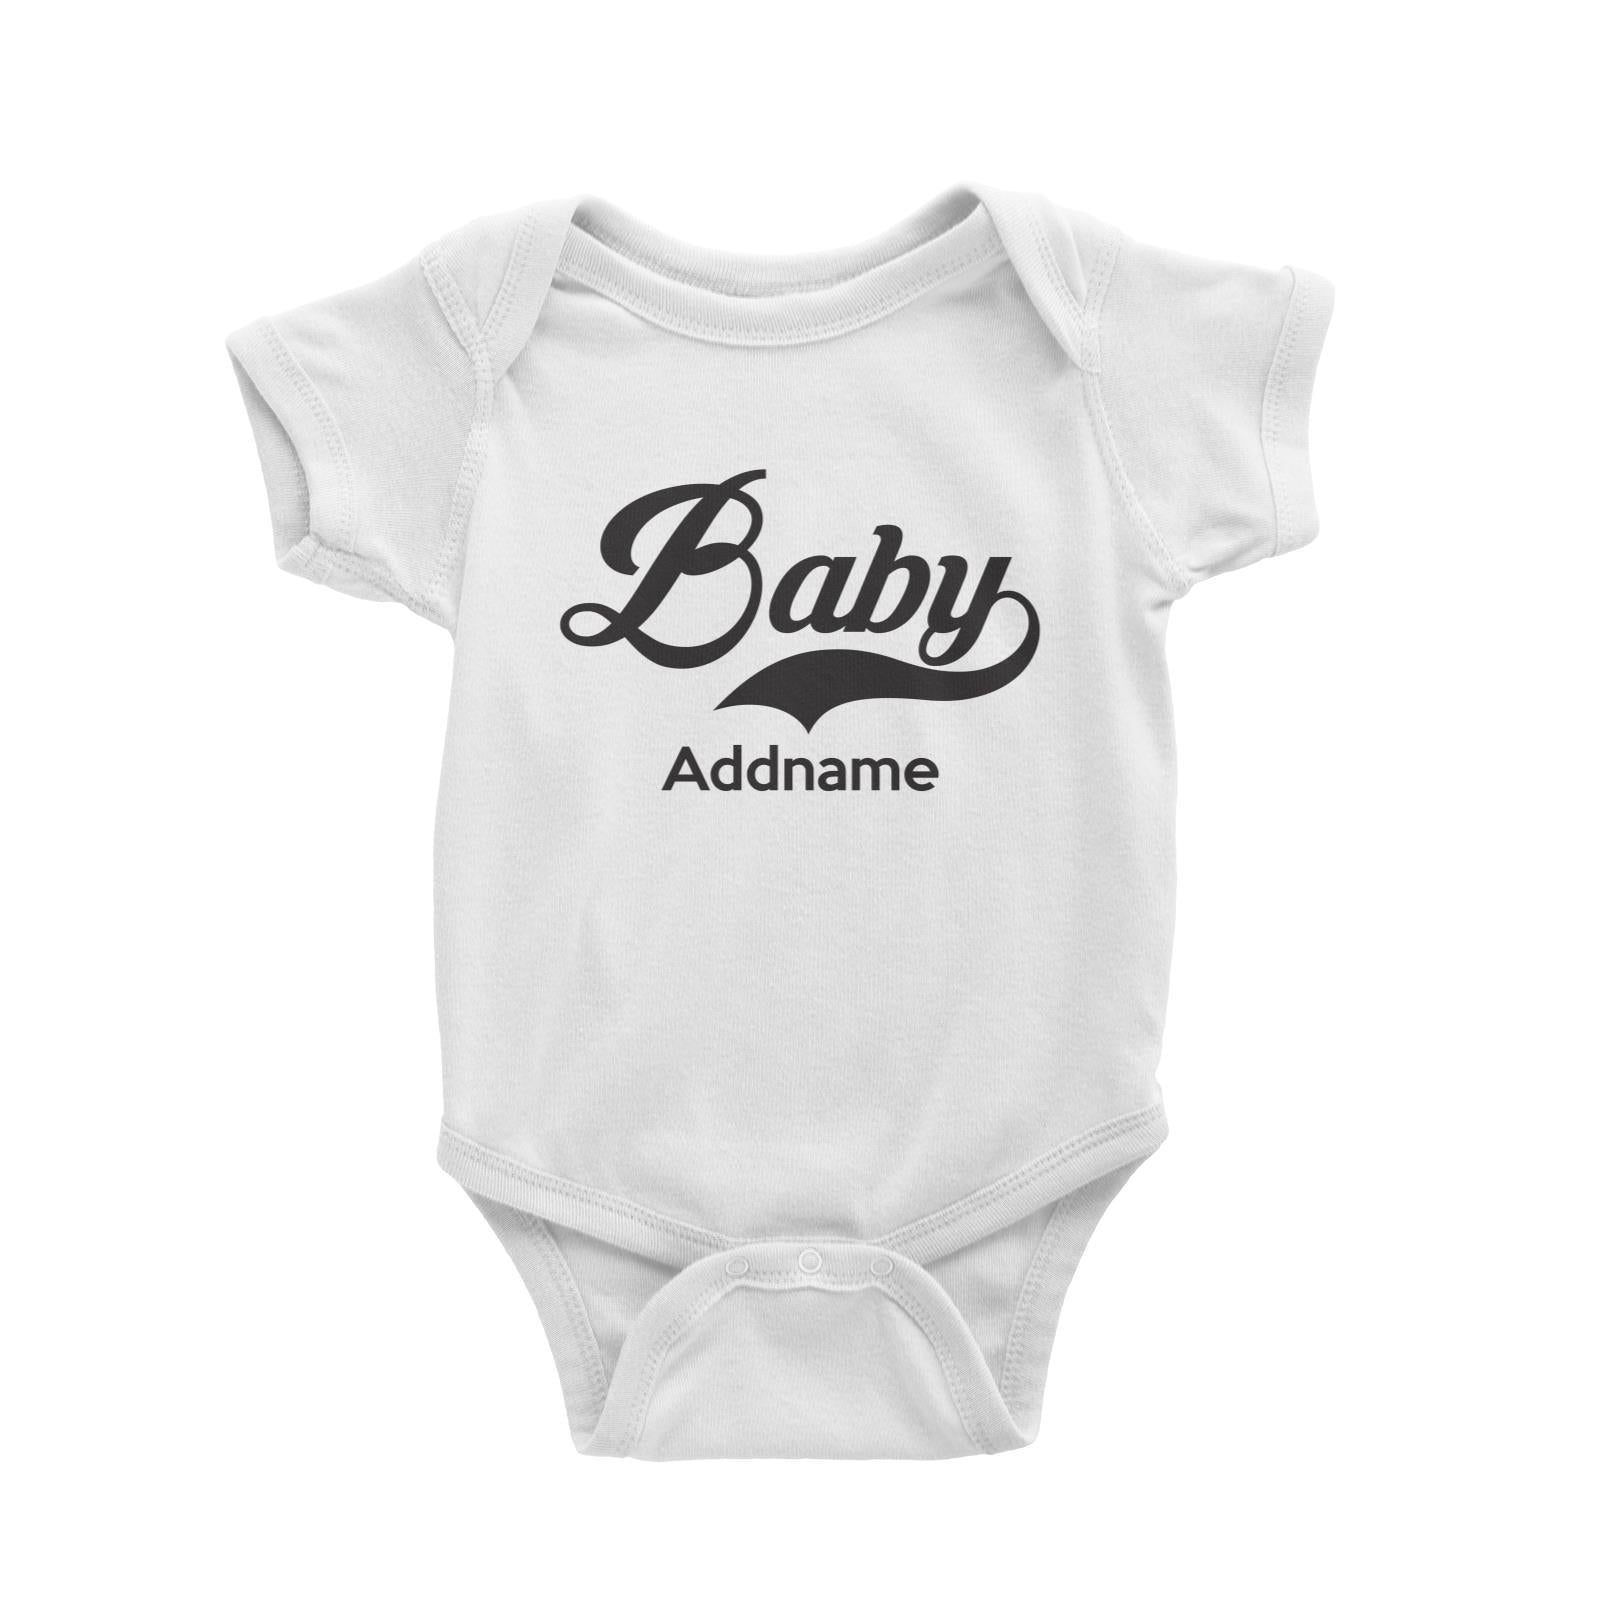 Retro Baby Addname Baby Romper  Matching Family Personalizable Designs